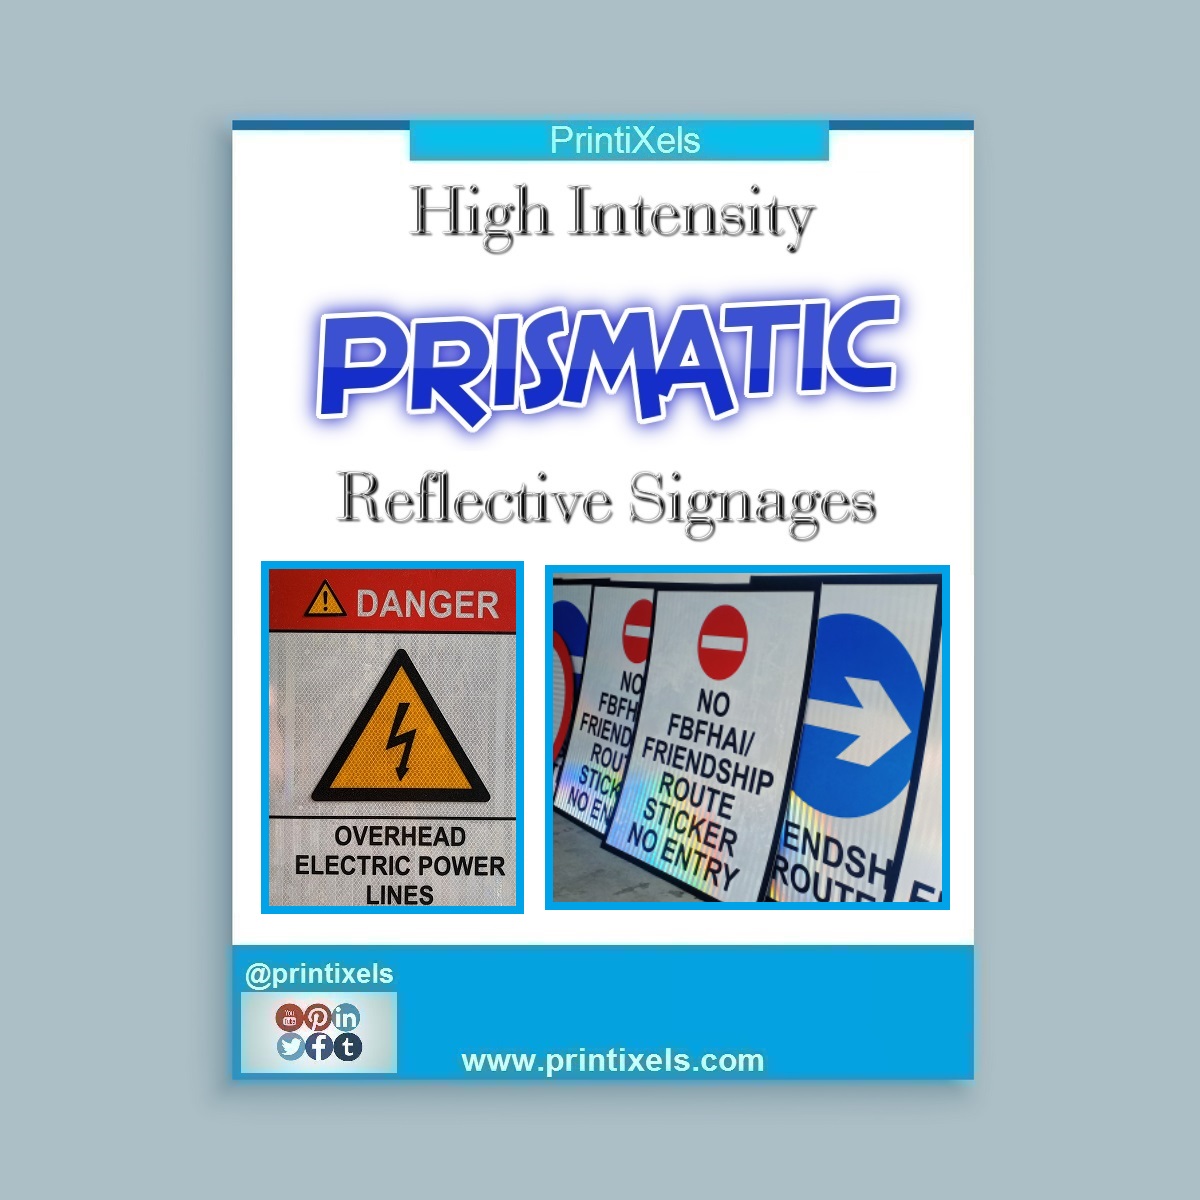 High Intensity Prismatic Reflective Signages